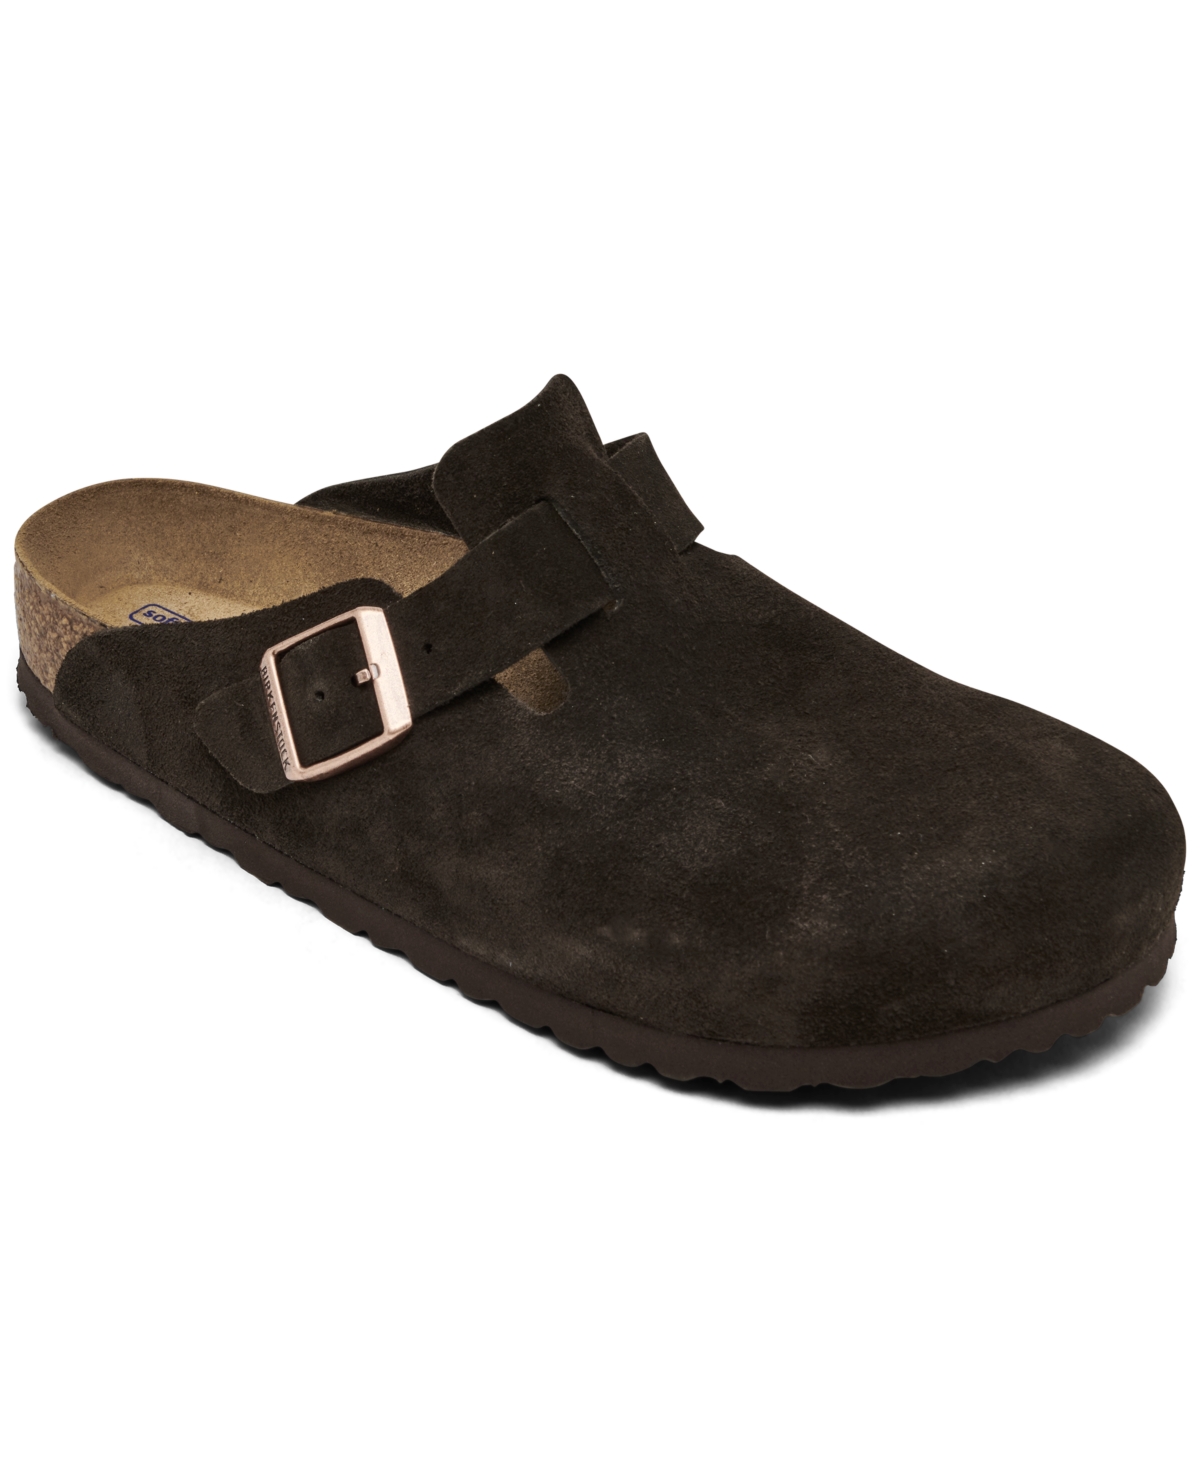 Men's Boston Soft Footbed Suede Leather Clogs from Finish Line - Brown